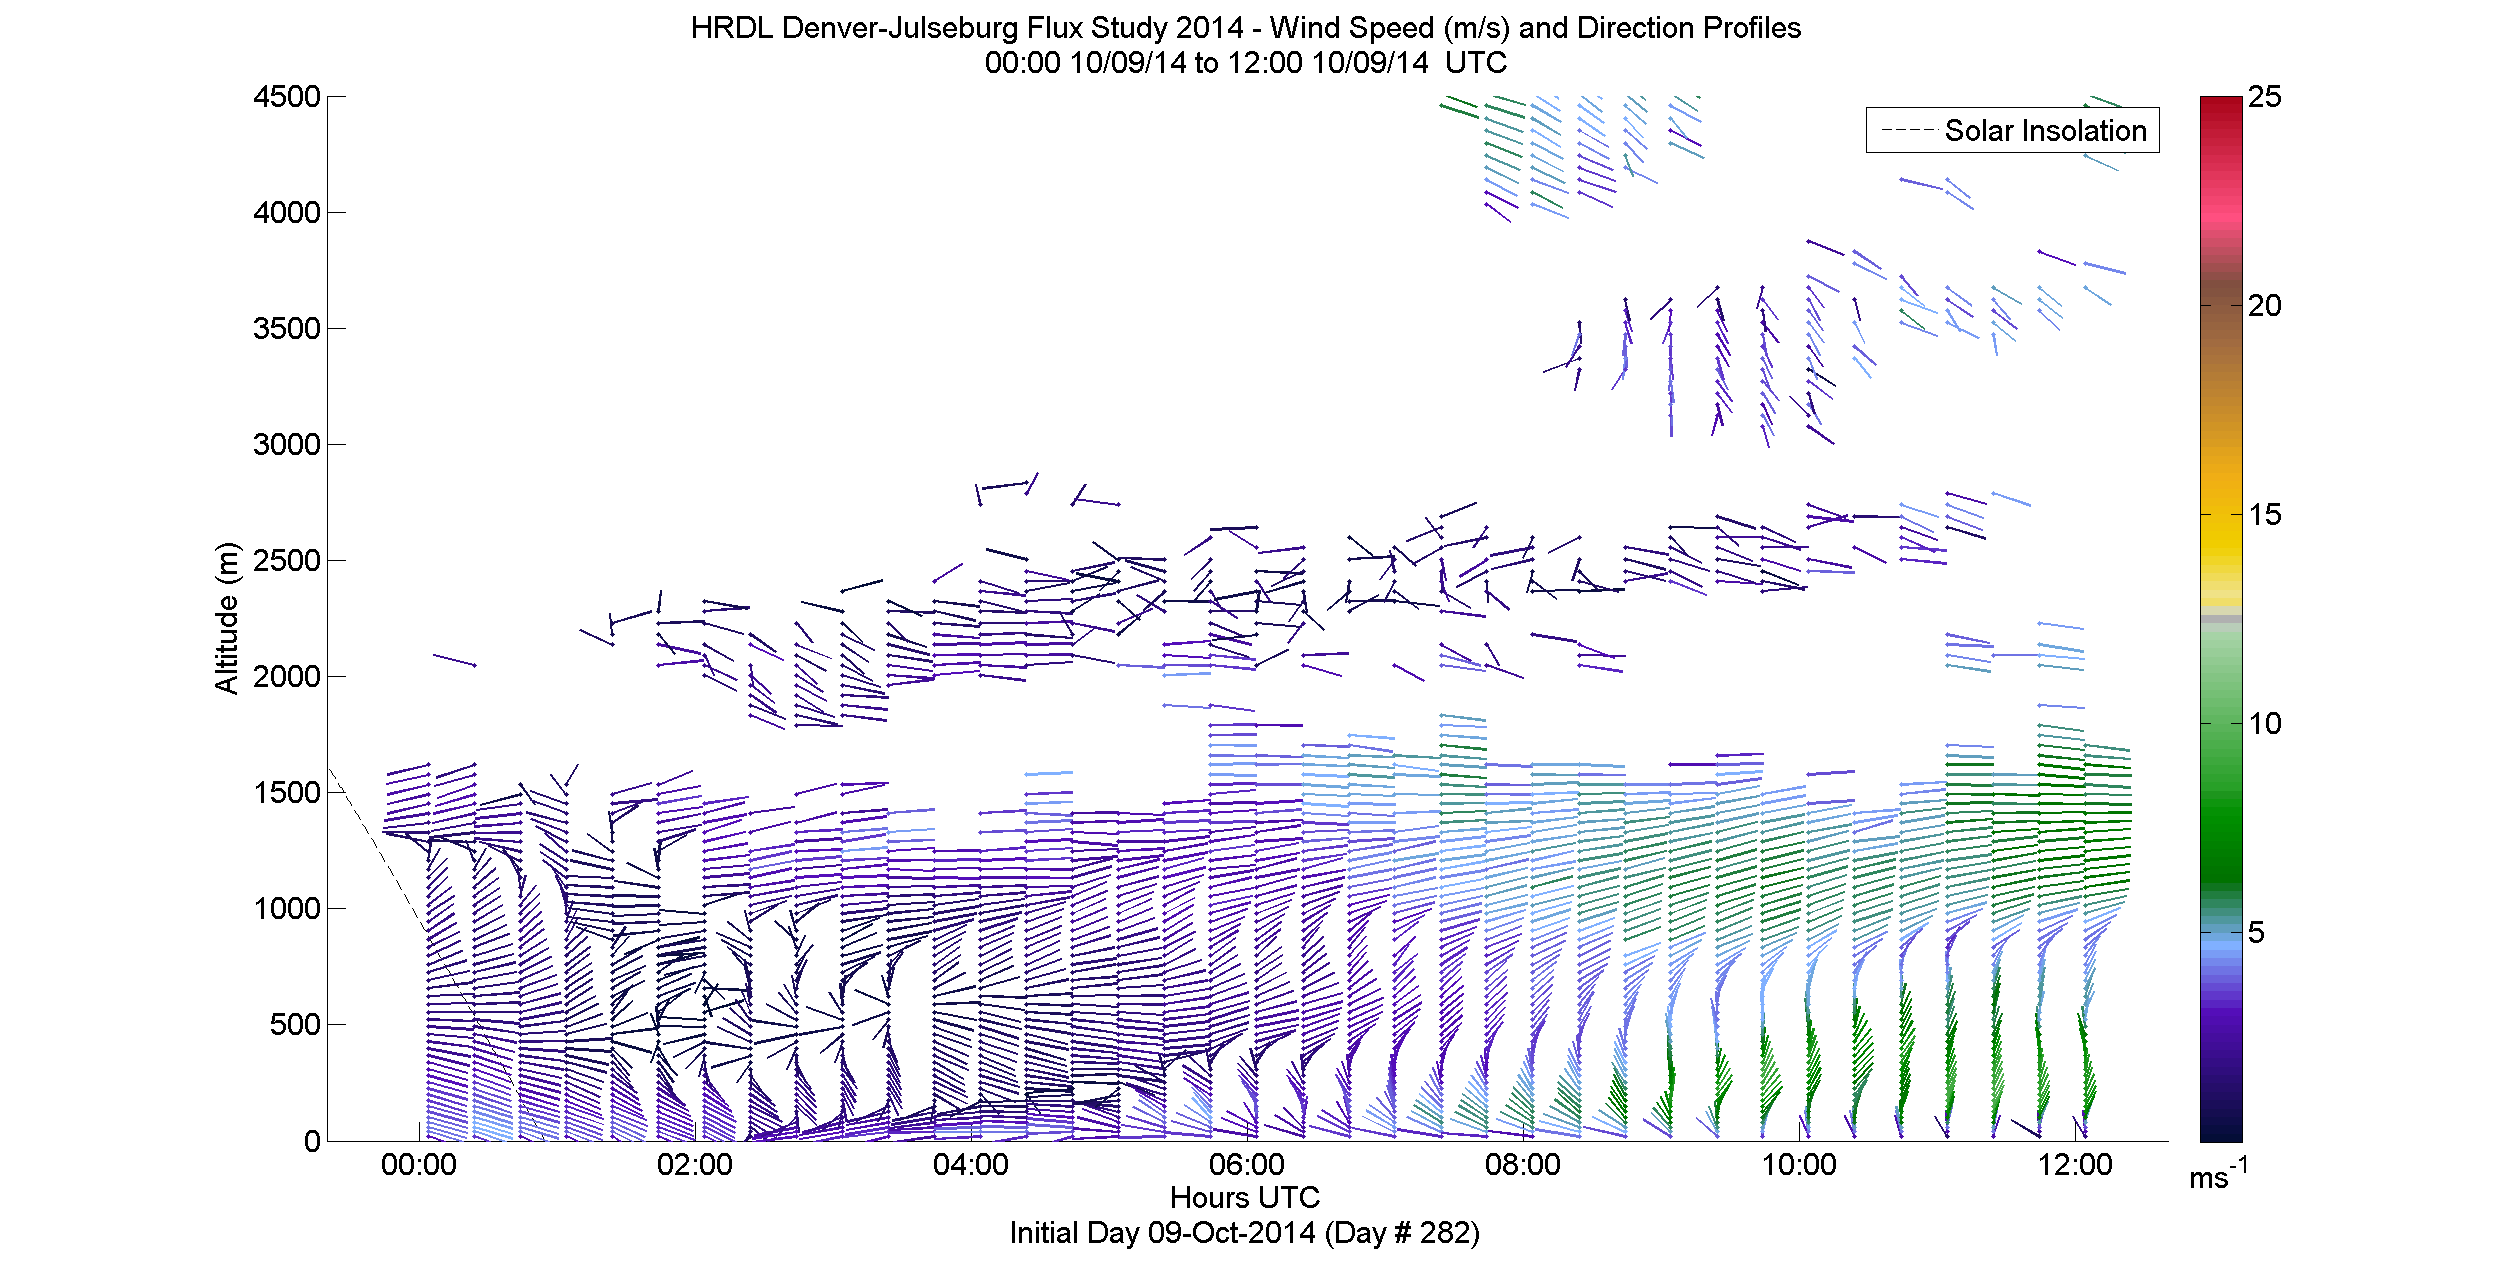 HRDL speed and direction profile - October 9 am